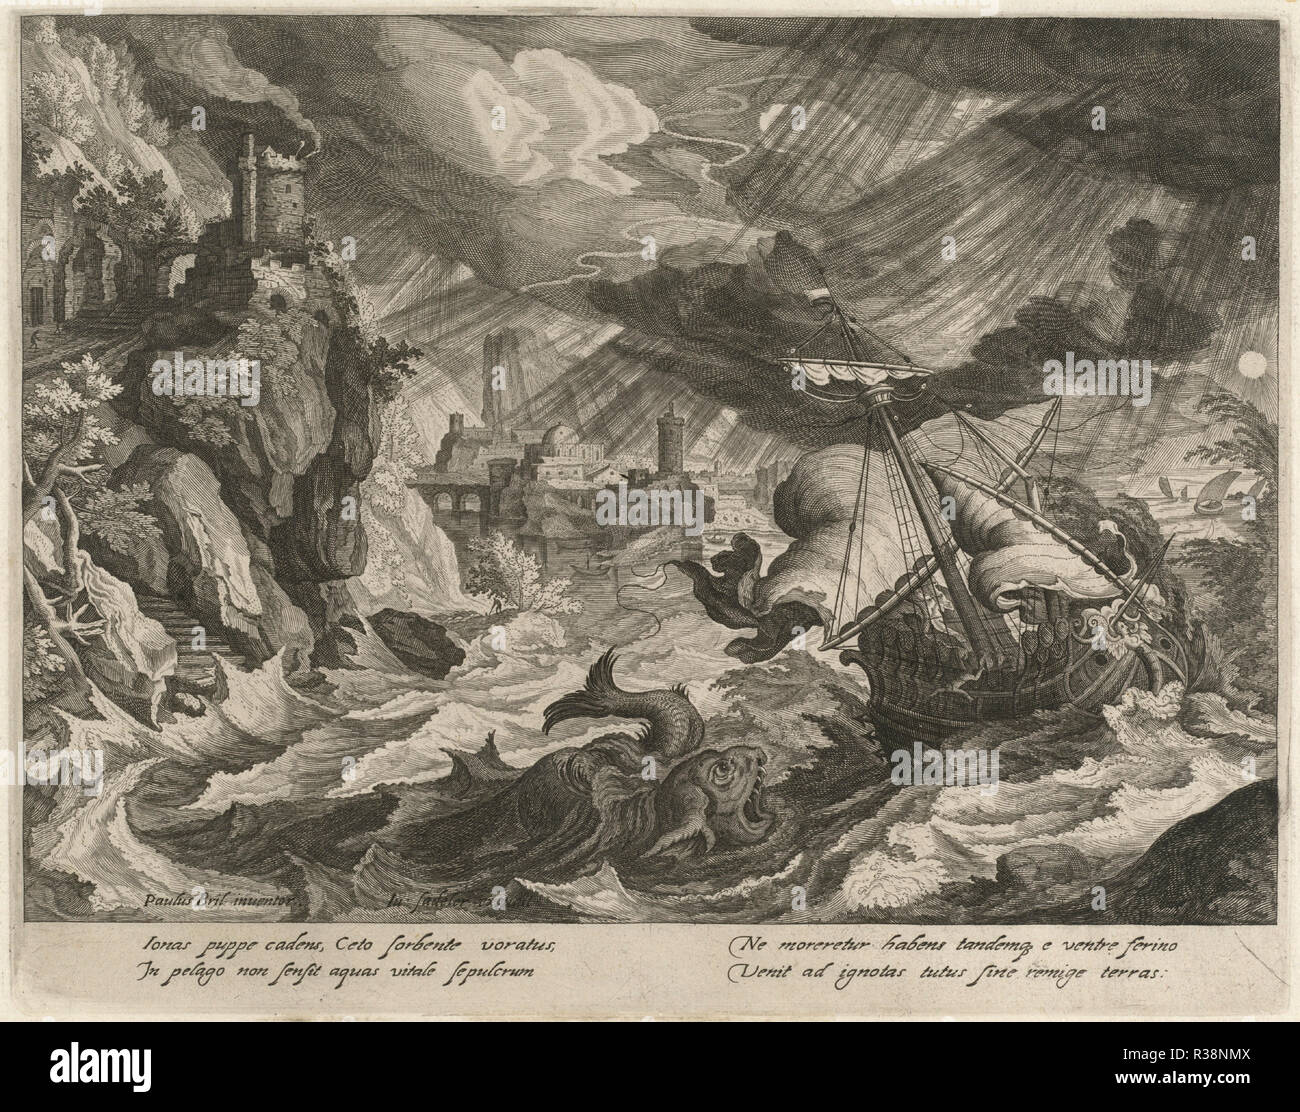 Jonah Thrown into the Stormy Sea. Dated: 1610/1620. Dimensions: plate: 21 x 26.8 cm (8 1/4 x 10 9/16 in.)  overall: 28.6 x 35.4 cm (11 1/4 x 13 15/16 in.). Medium: engraving on laid paper. Museum: National Gallery of Art, Washington DC. Author: Justus Sadeler after Paul Bril. Stock Photo